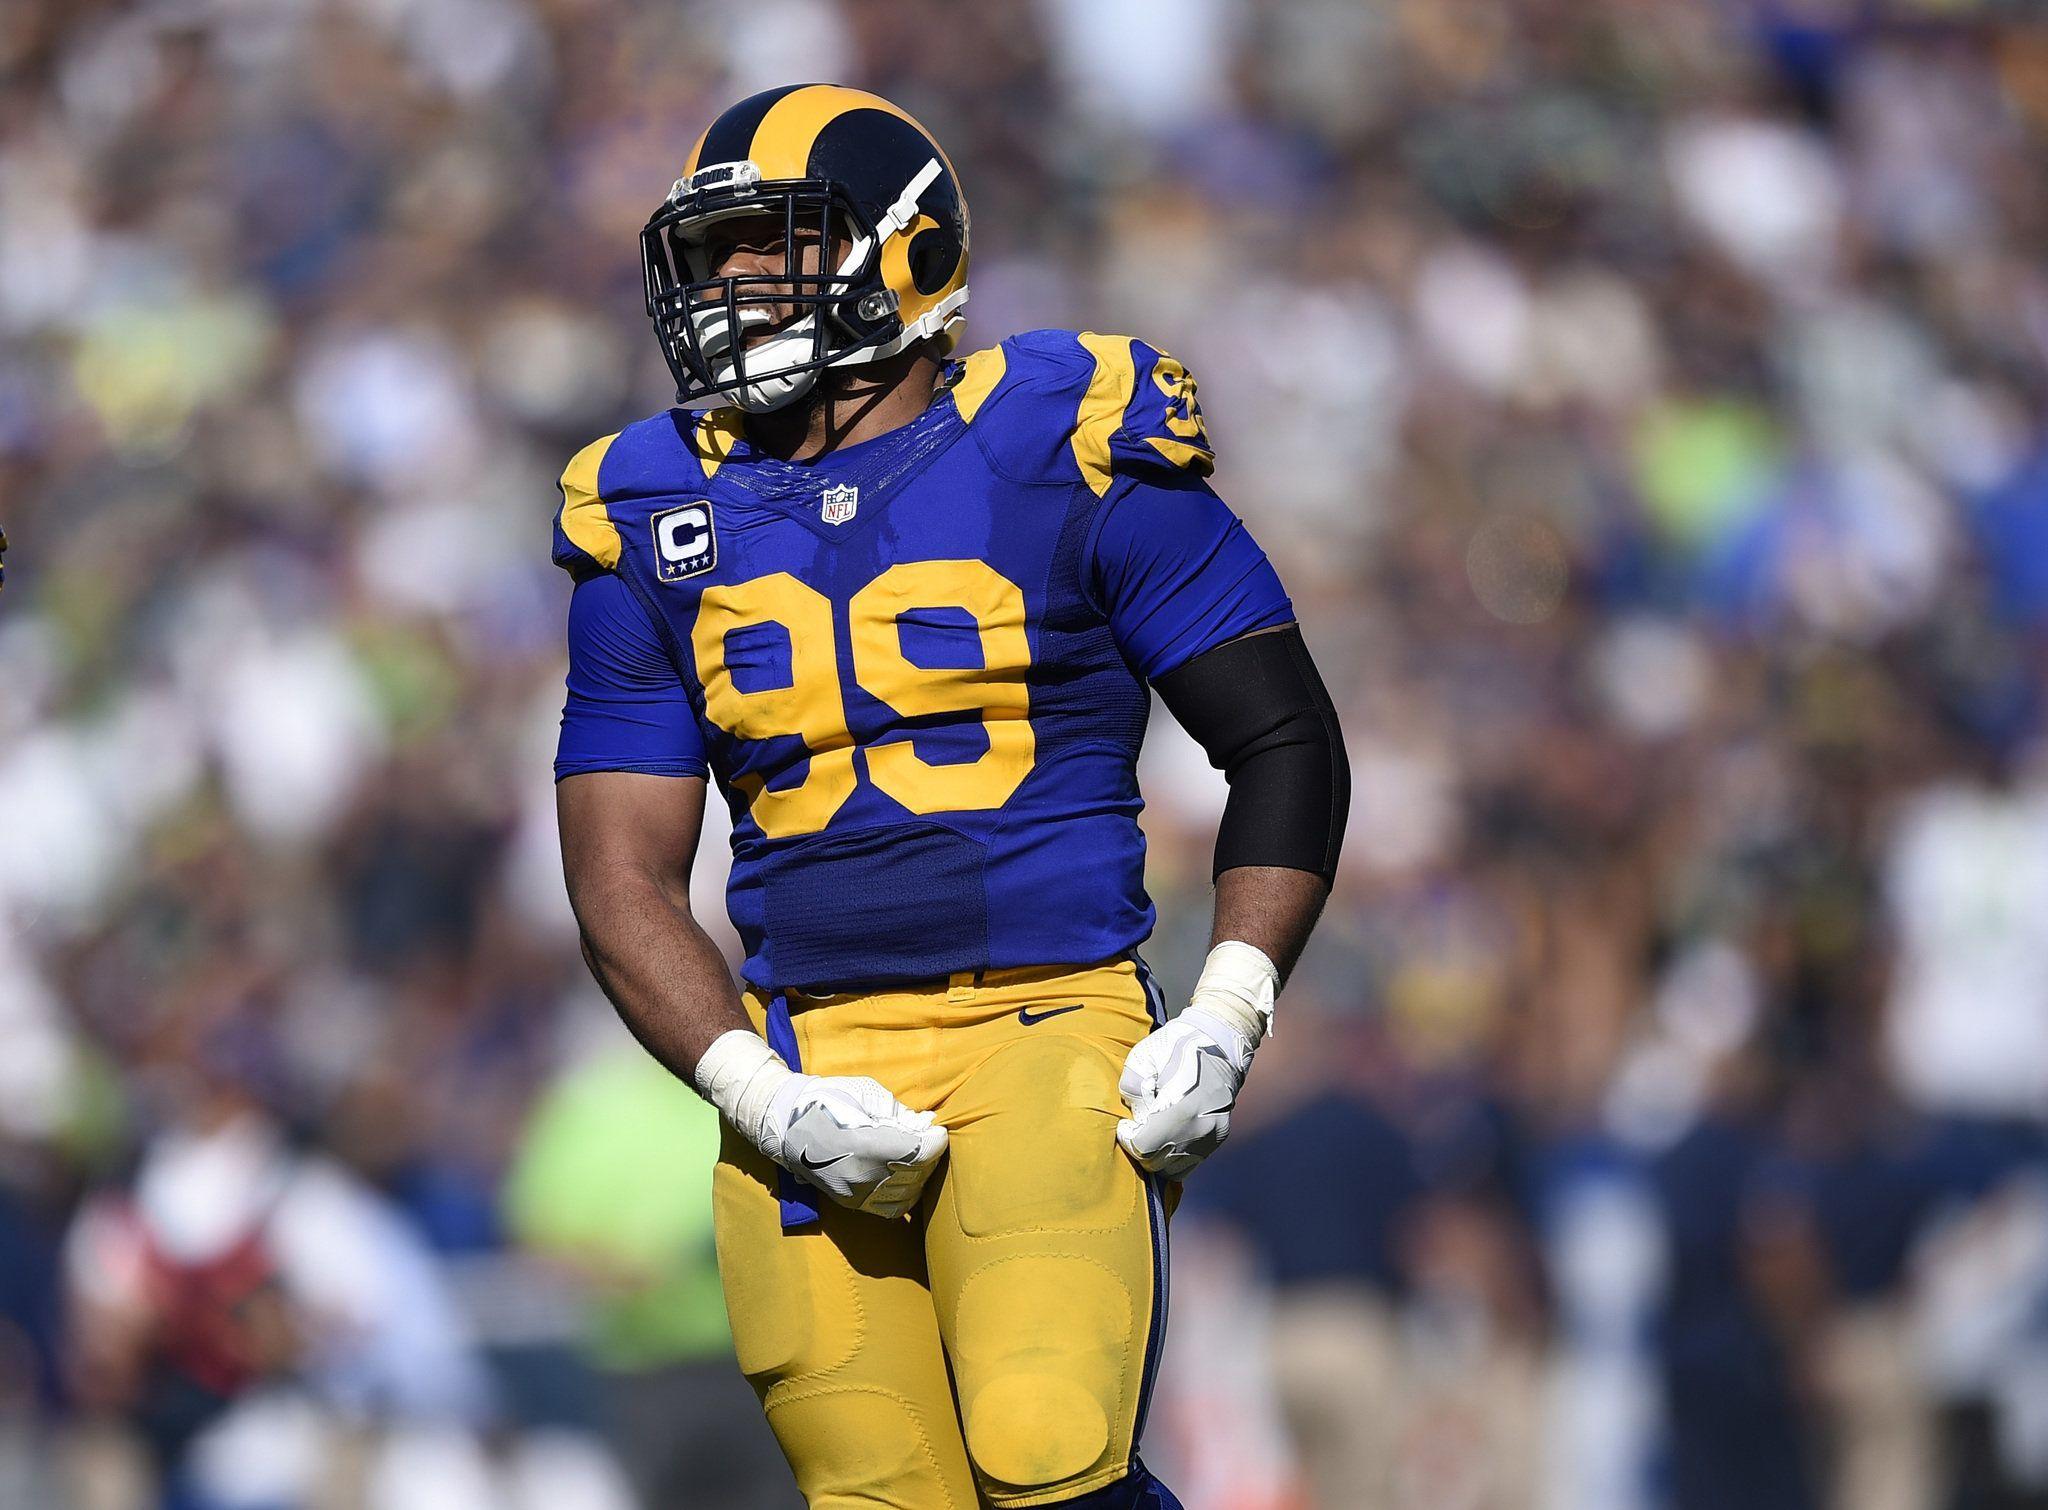 Aaron Donald, the 2017 Defensive Player of the Year and the best